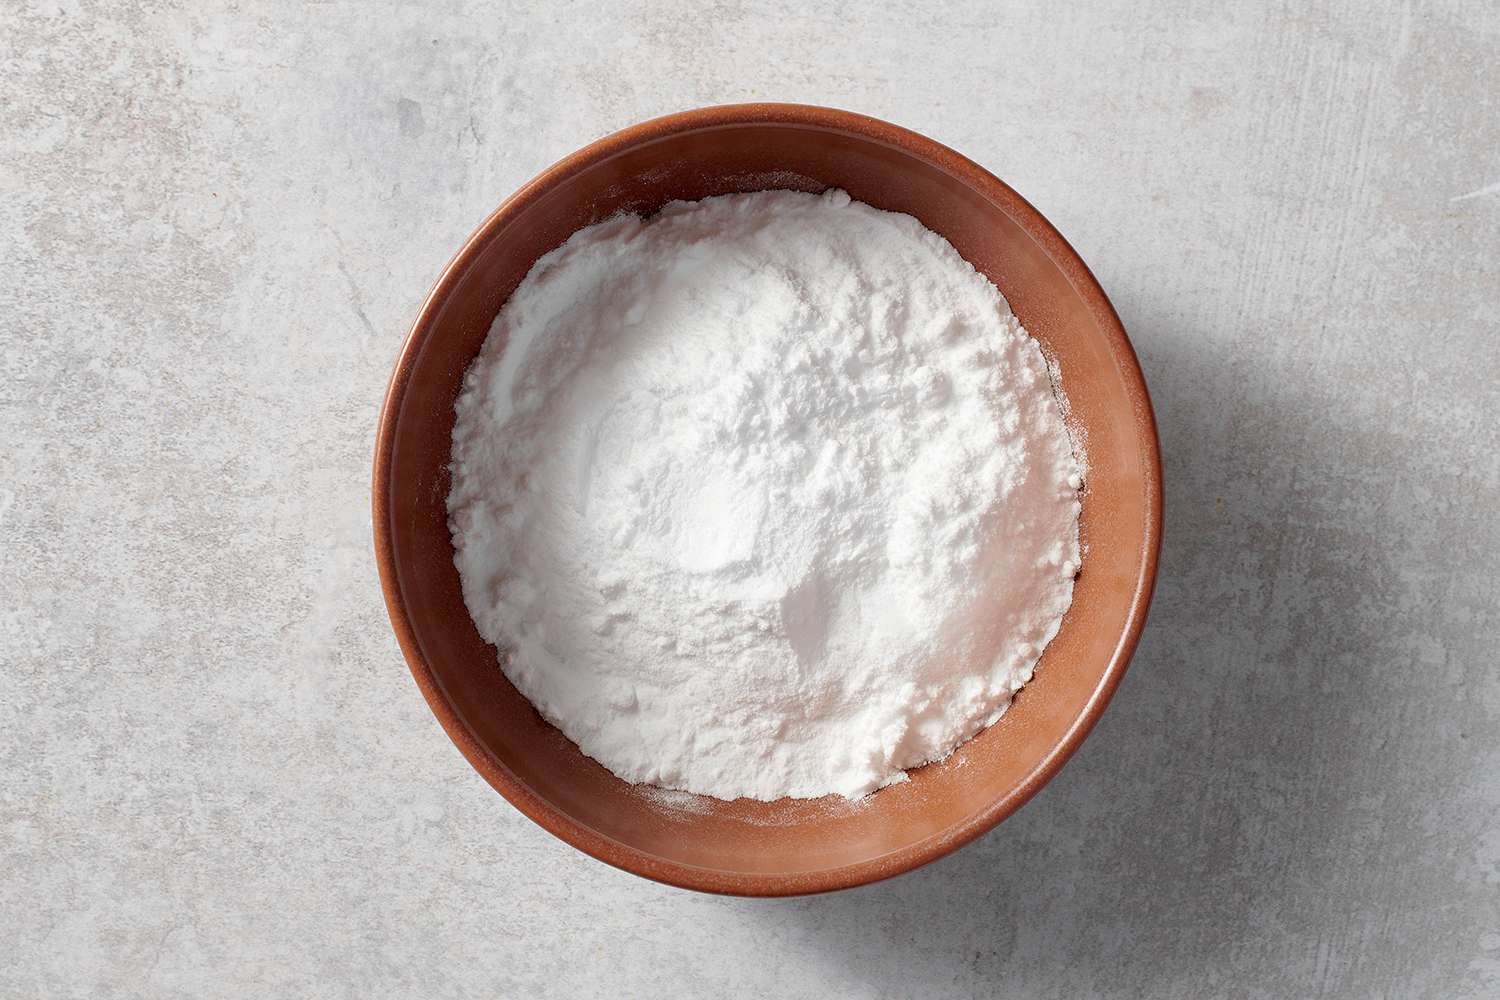 How To Tell If Your Baking Soda Has Gone Bad